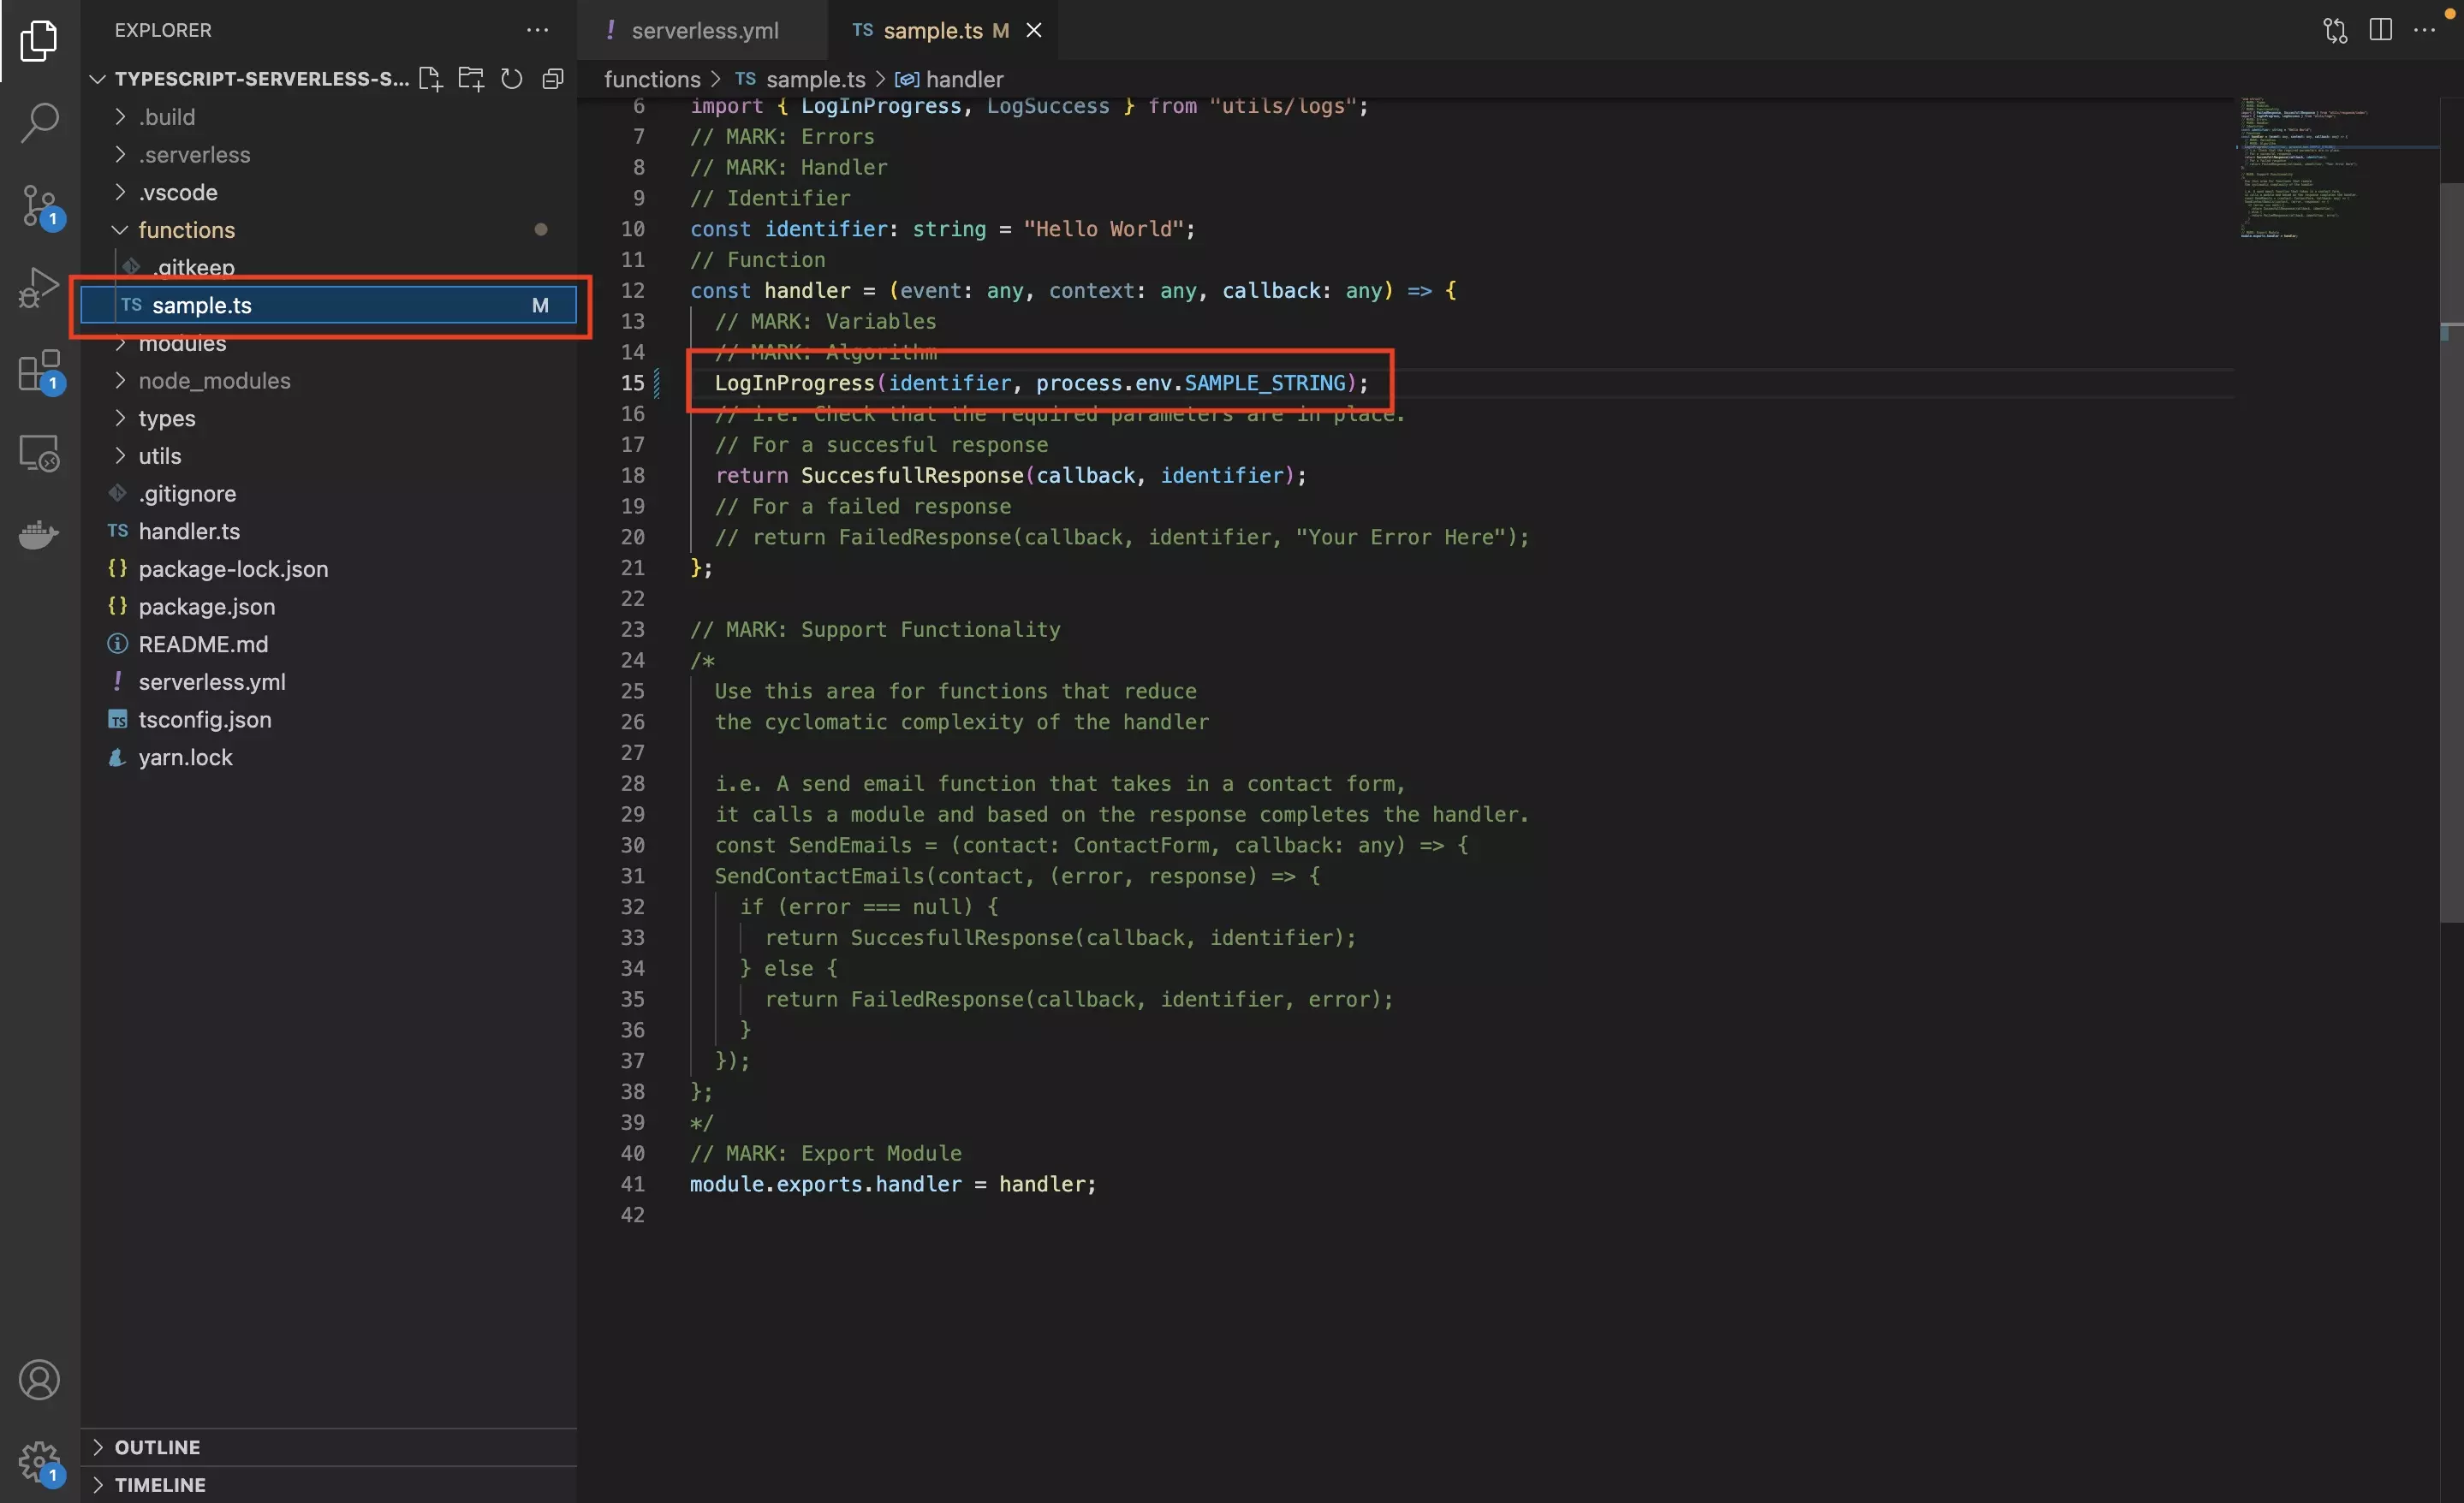 A screenshot of VSCode showing you how to use an environment variable in a serverless function.